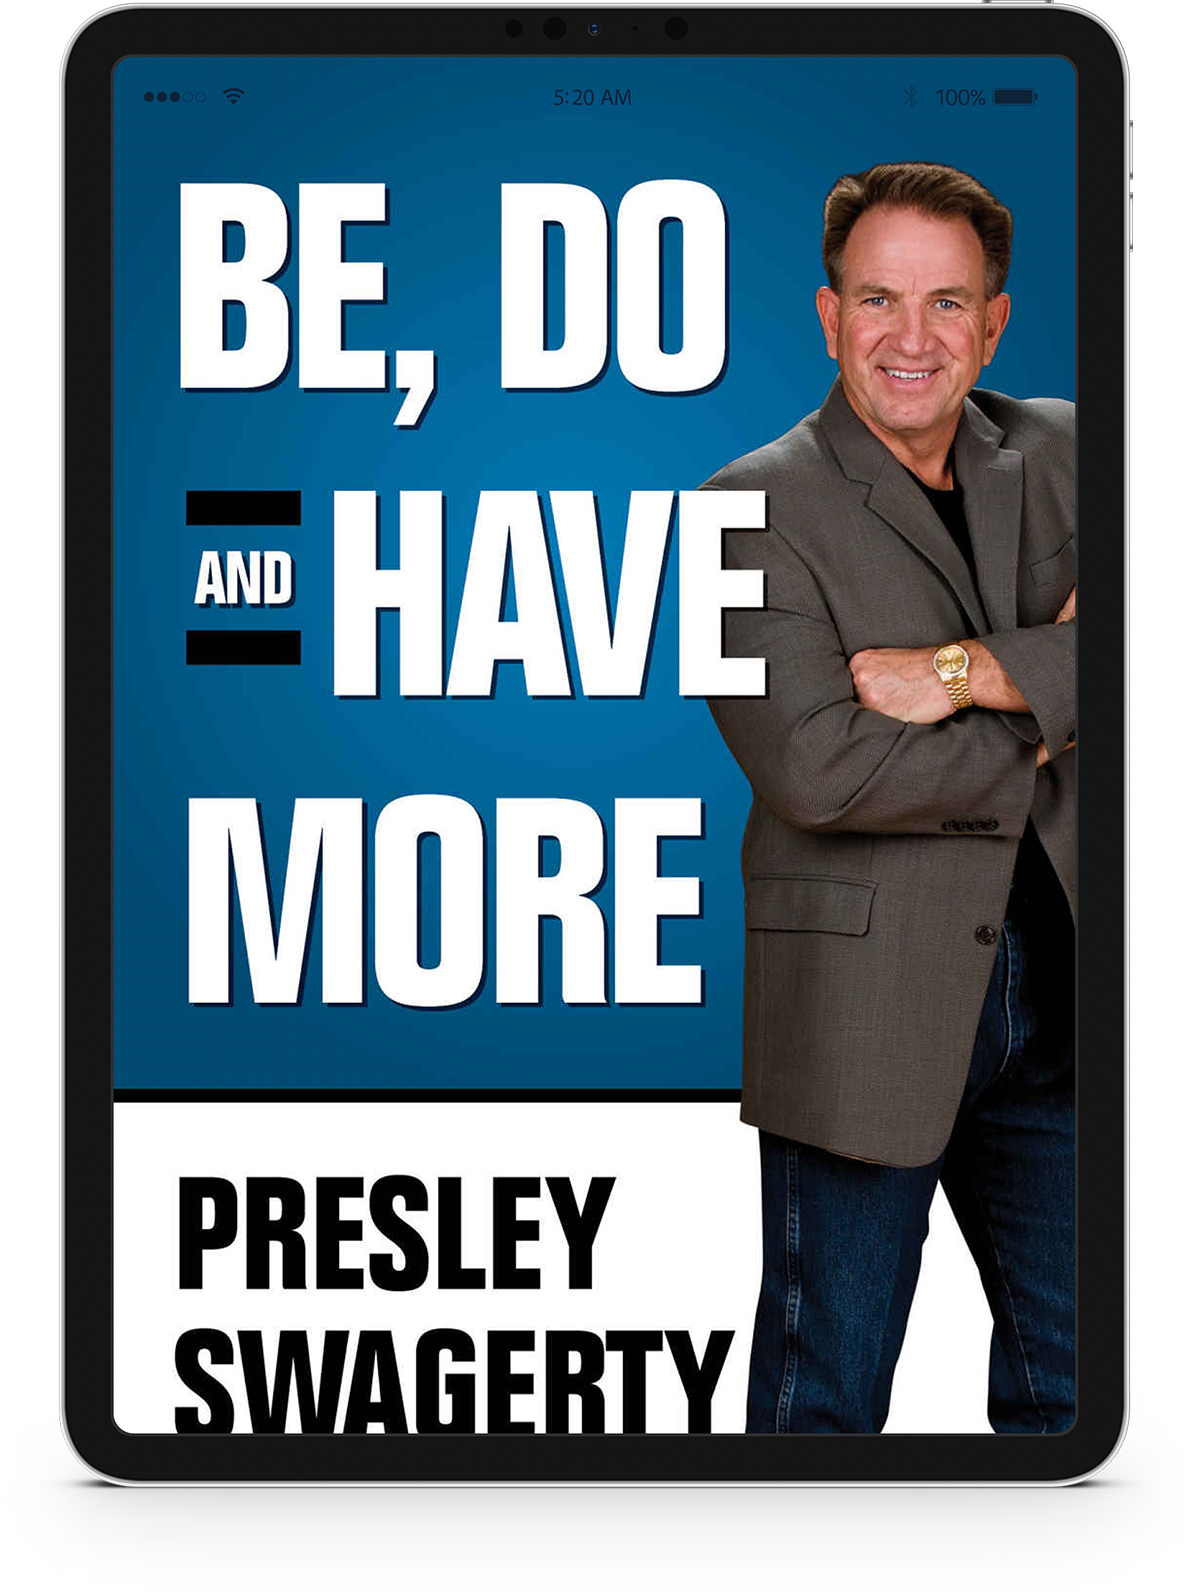 Photo of Be Do and Have More book cover by Presley Swagerty on Apple iPad